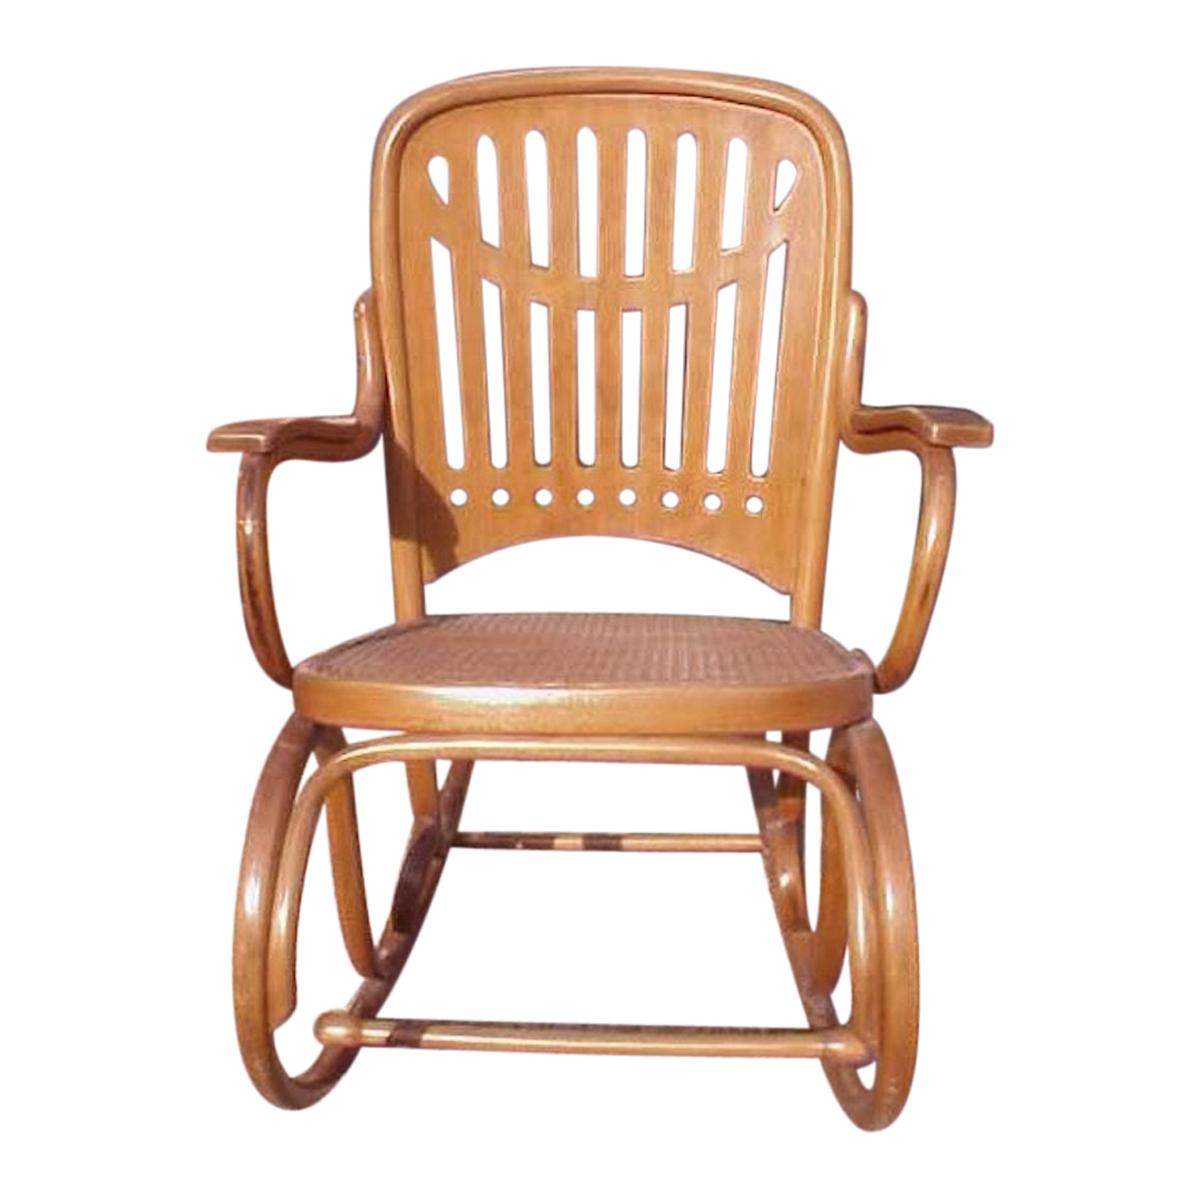 Gustav Siegel Attributed, Made by Thonet, a Bentwood & Cane Rocking Chair For Sale